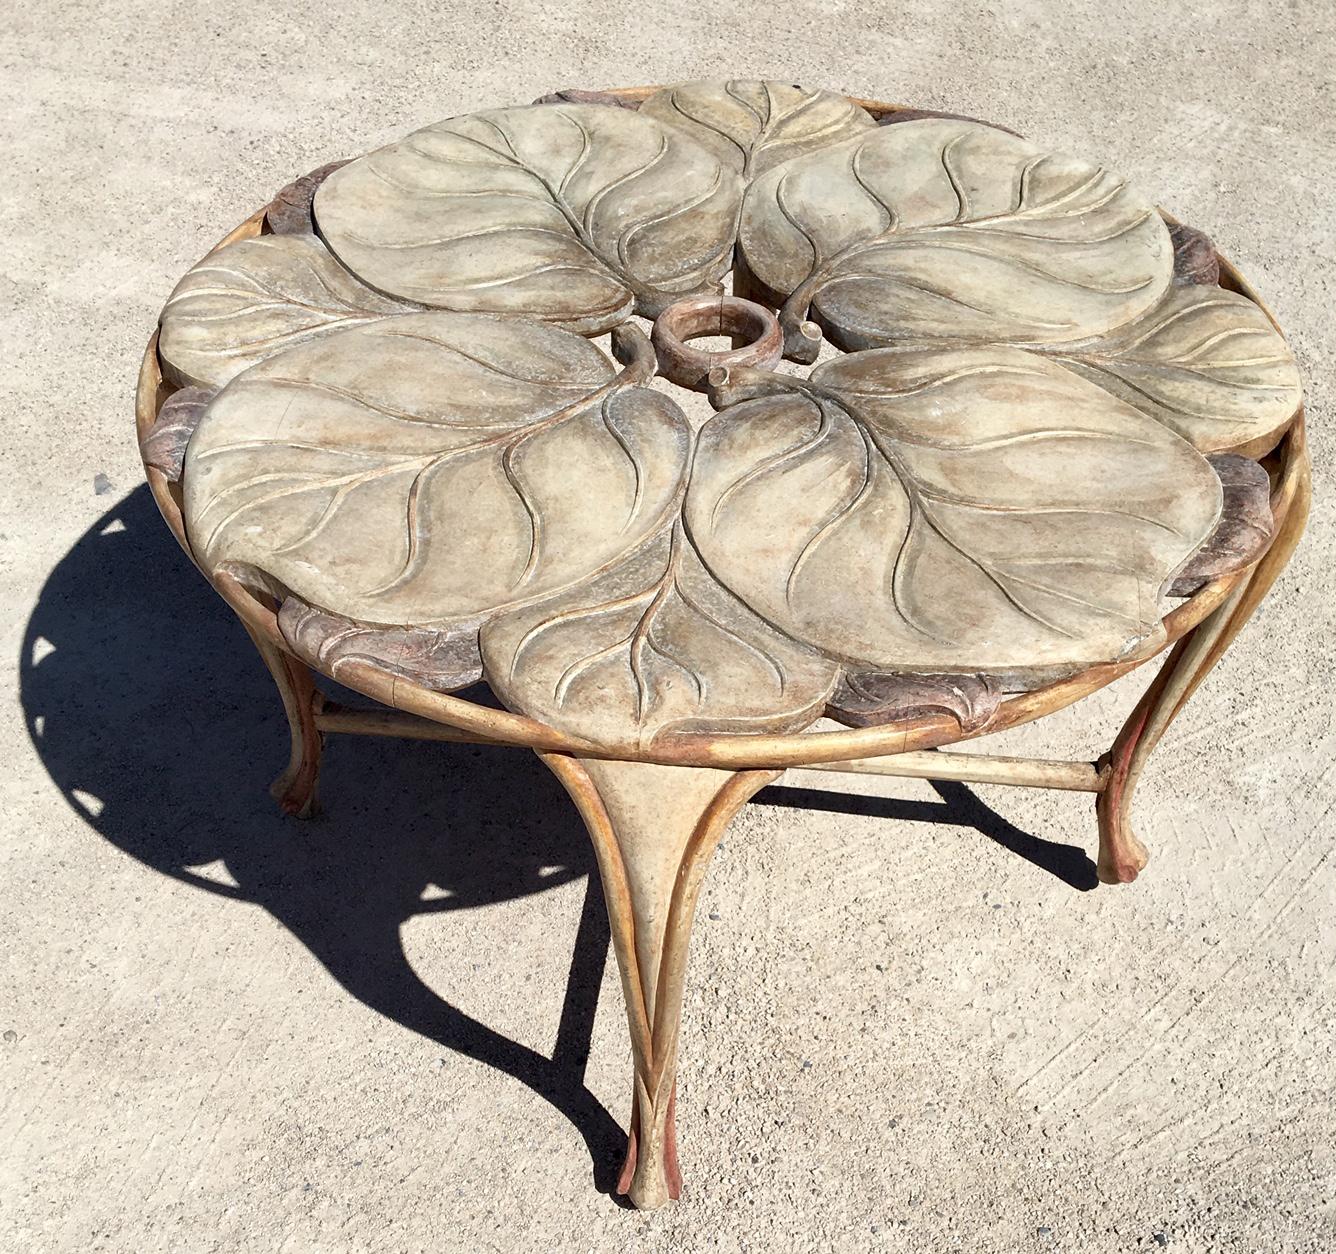 Vintage Italian Carved Wood Round Table with Large Leaf Table Top, 1970s In Good Condition For Sale In Baambrugge, NL